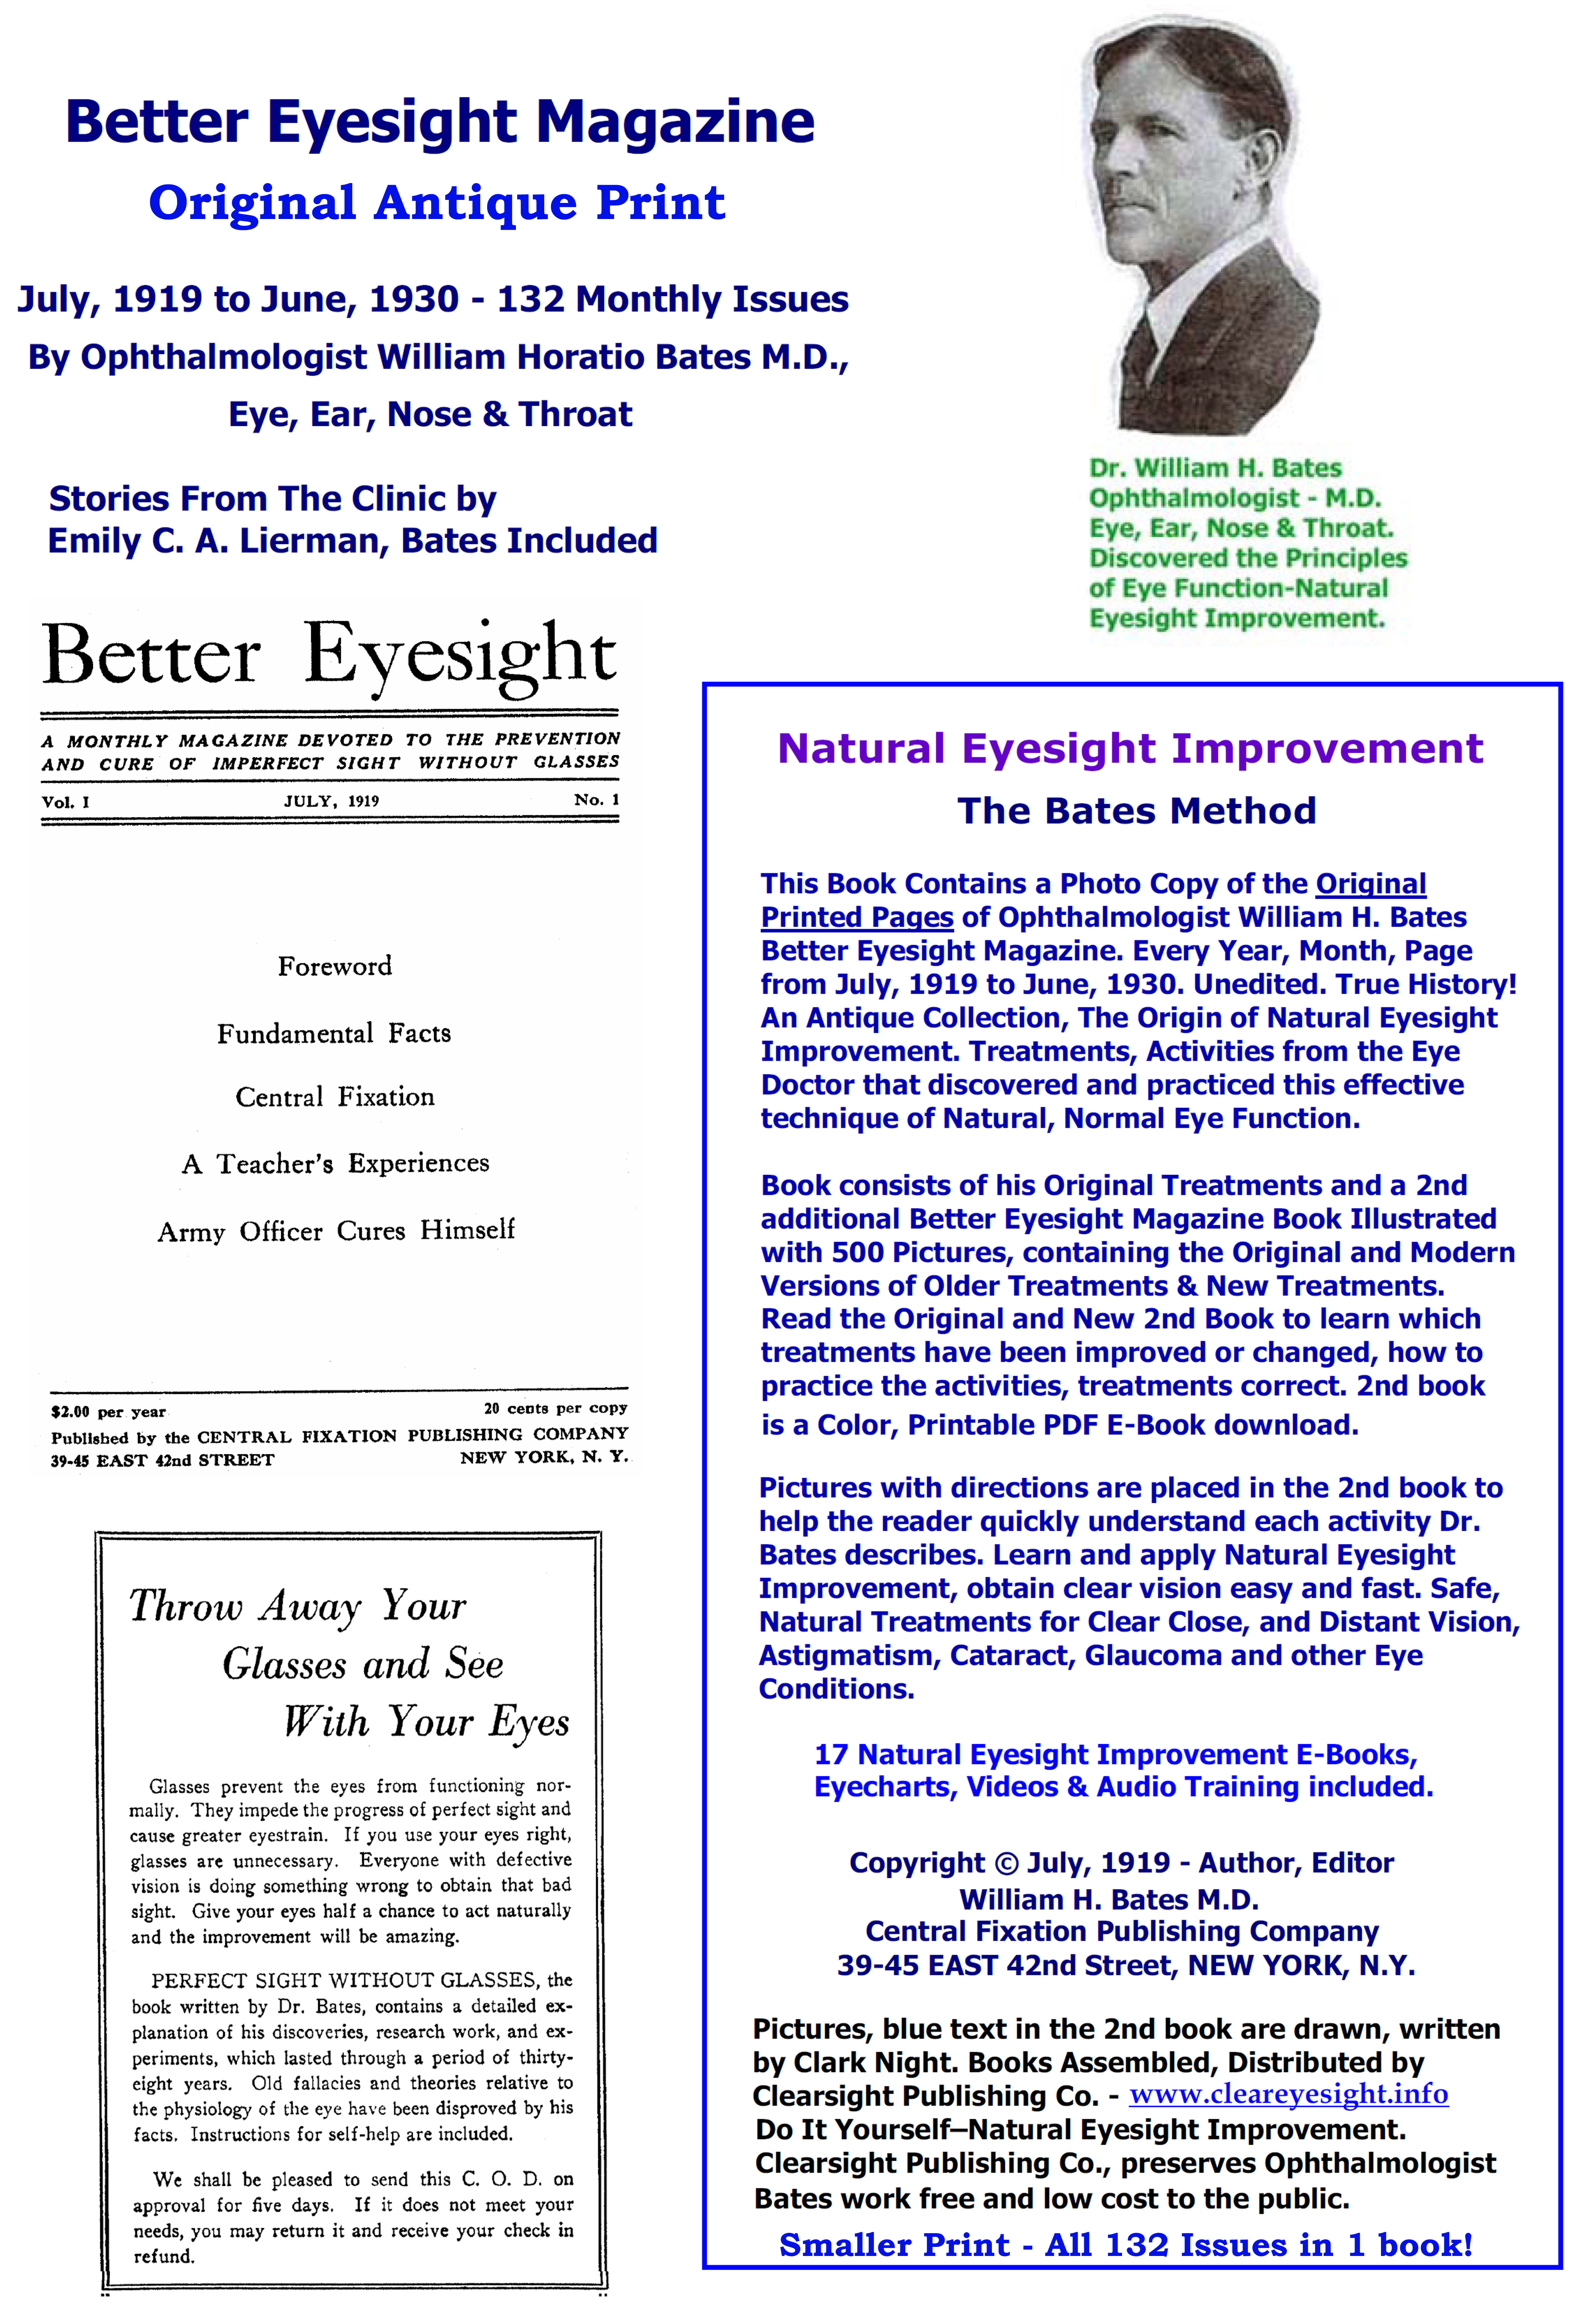 Better Eyesight Magazine - 132 Issues, 2400+ Pages  in Small Print. Original, Antique